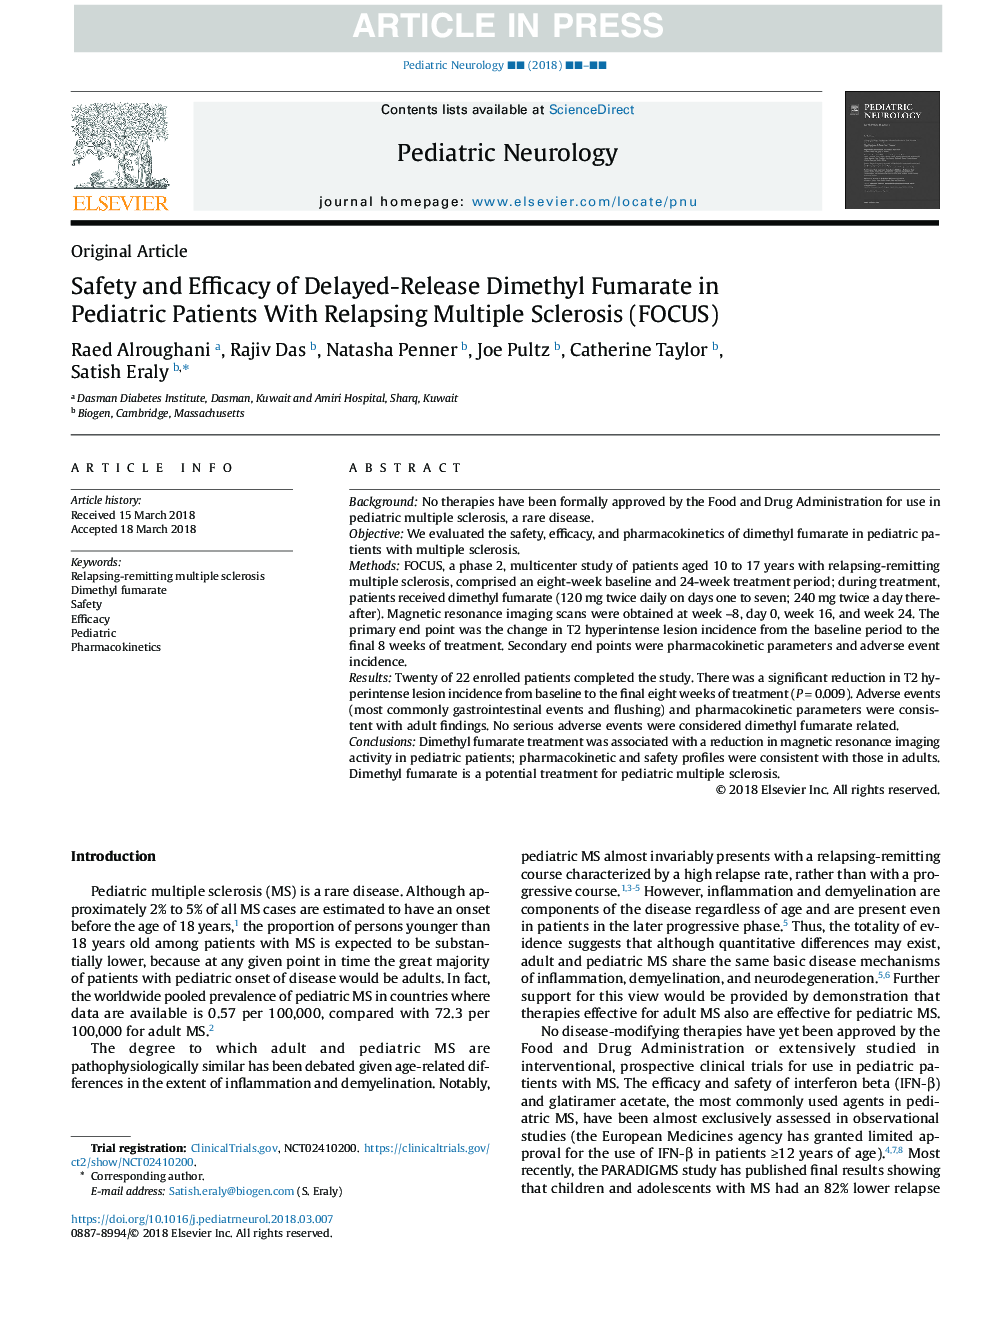 Safety and Efficacy of Delayed-Release Dimethyl Fumarate in Pediatric Patients With Relapsing Multiple Sclerosis (FOCUS)